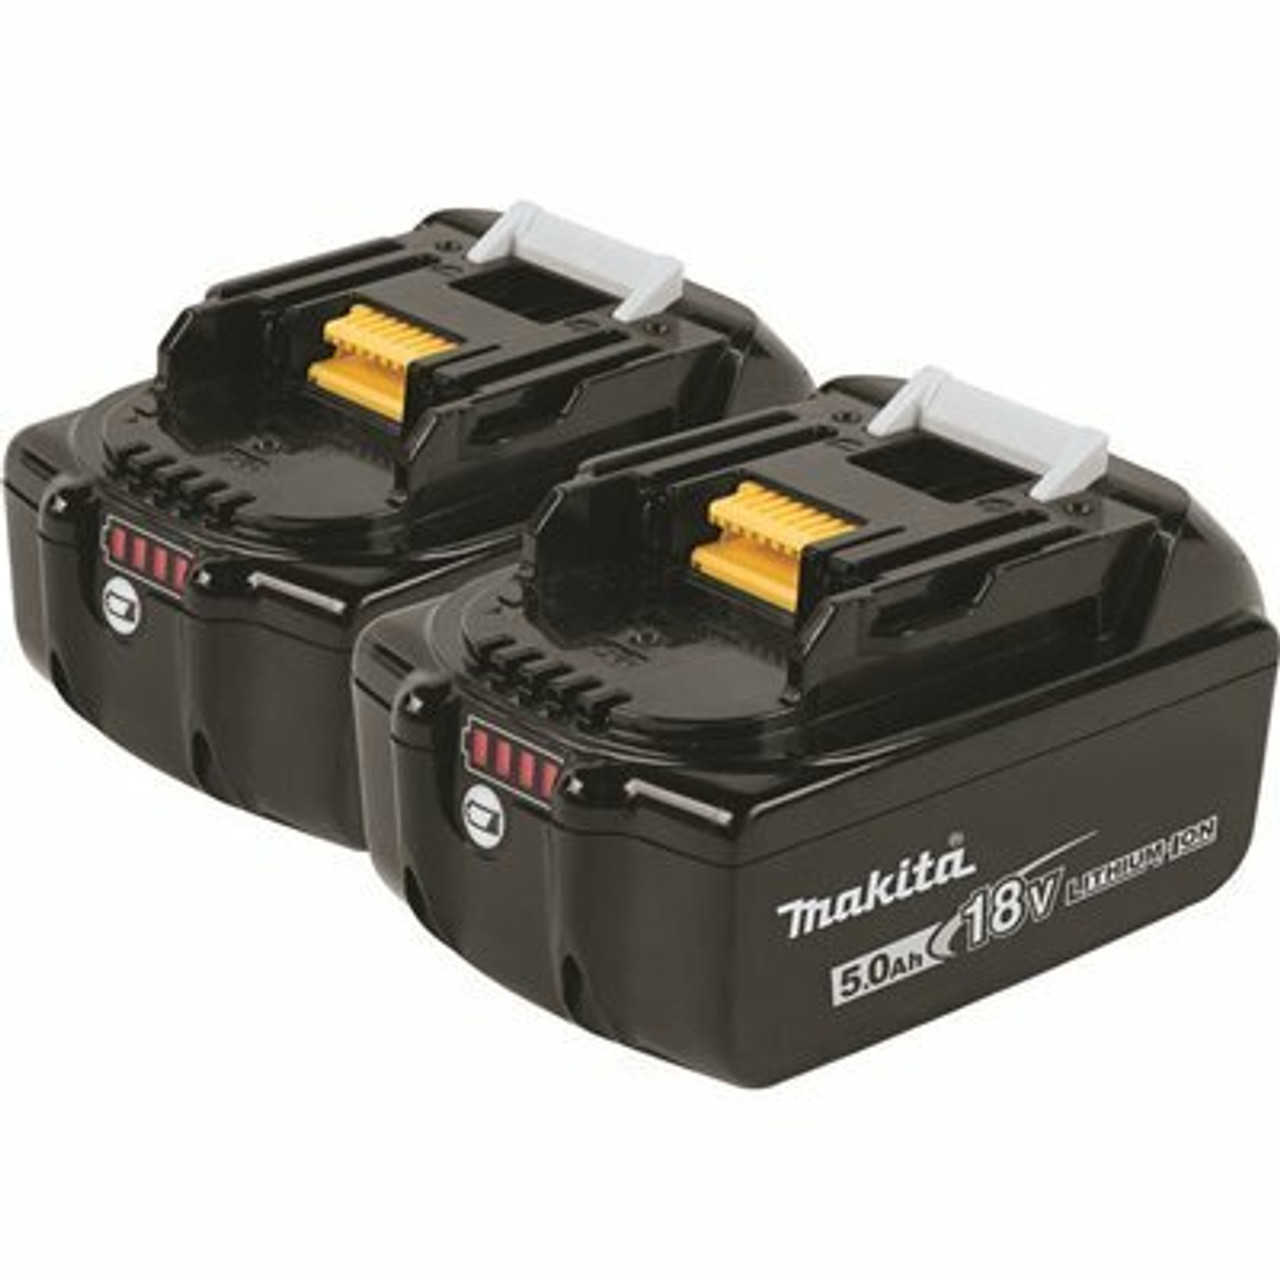 Makita 18-Volt Lxt Lithium-Ion High Capacity Battery Pack 5.0 Ah With Led Charge Level Indicator (2-Pack)